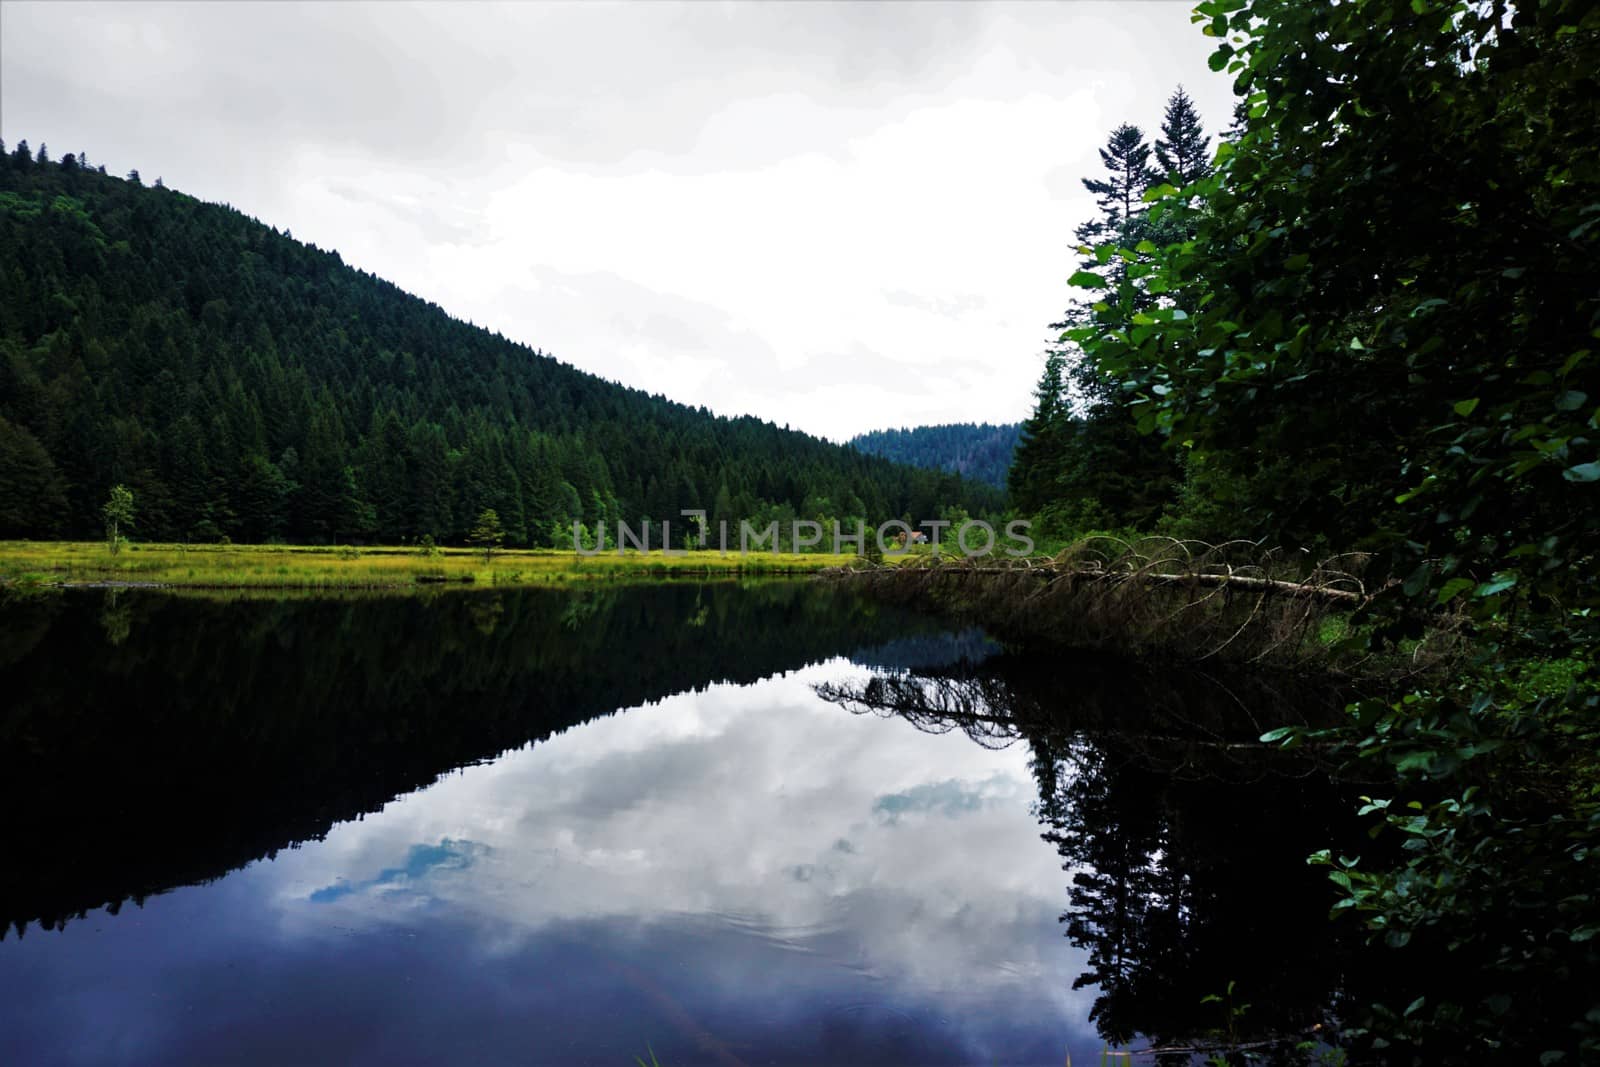 Sky and tree reflecting in almost black Lispach lake near La Bresse, France